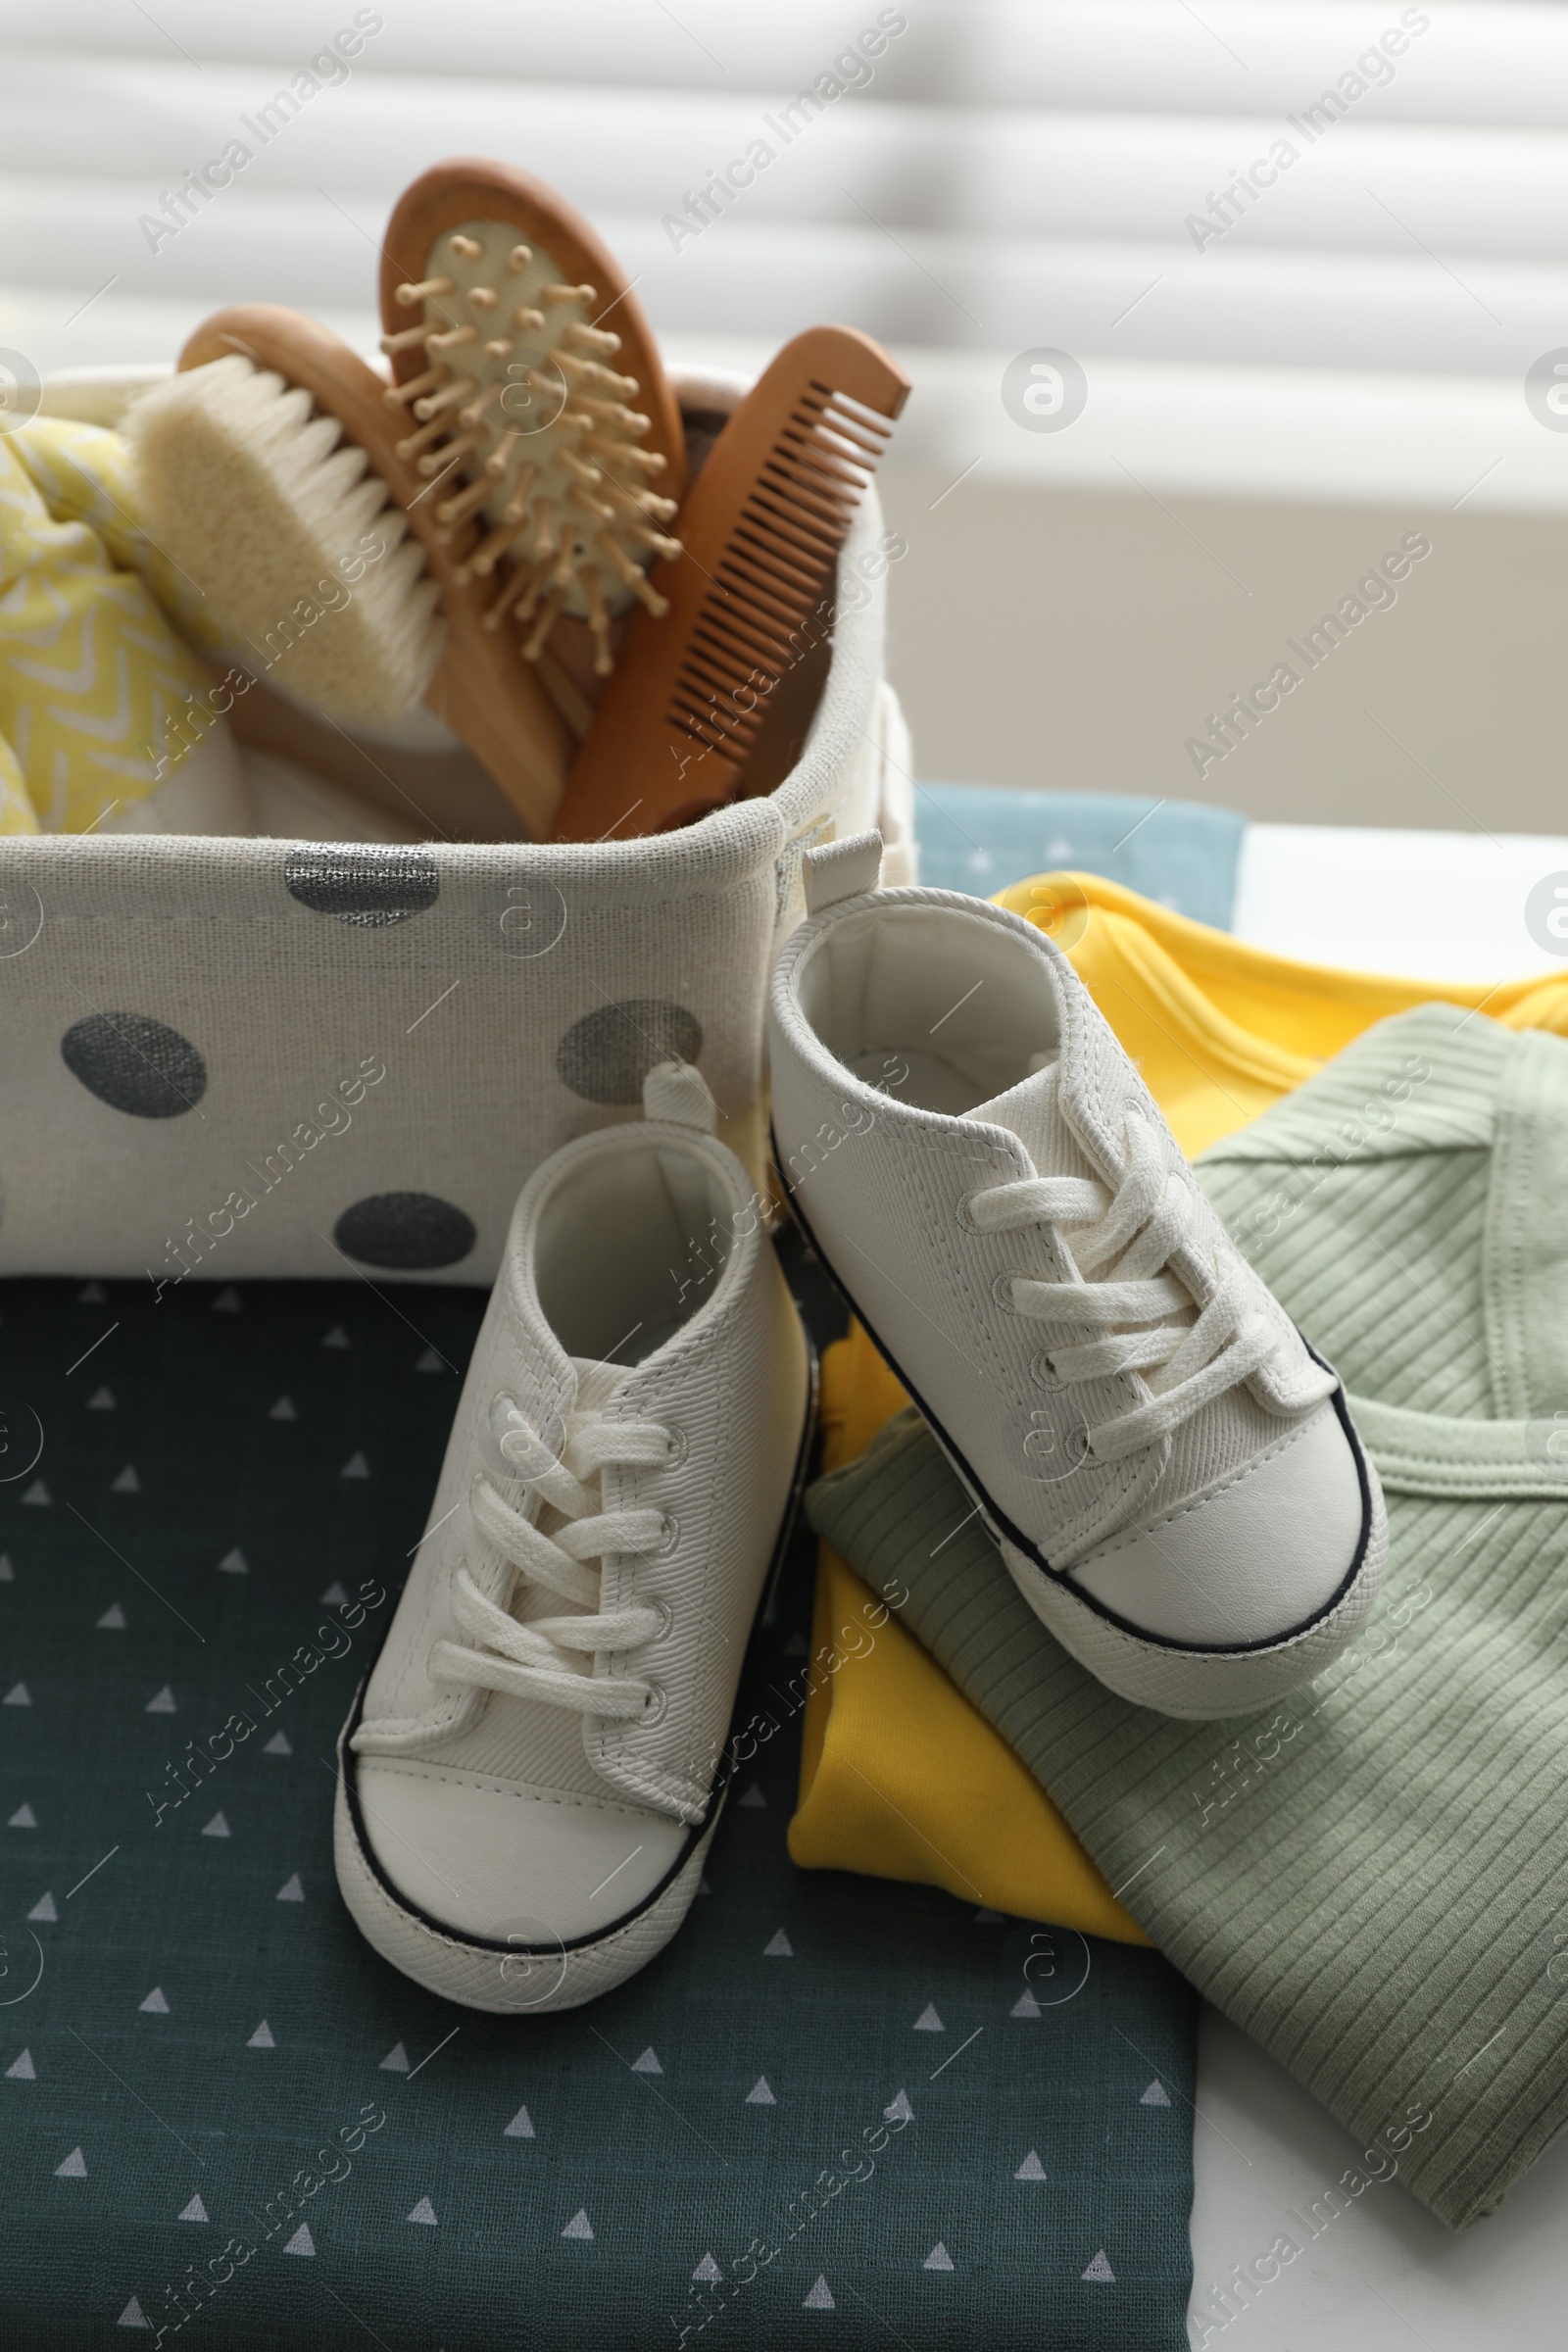 Photo of Baby clothes, shoes and accessories near window indoors